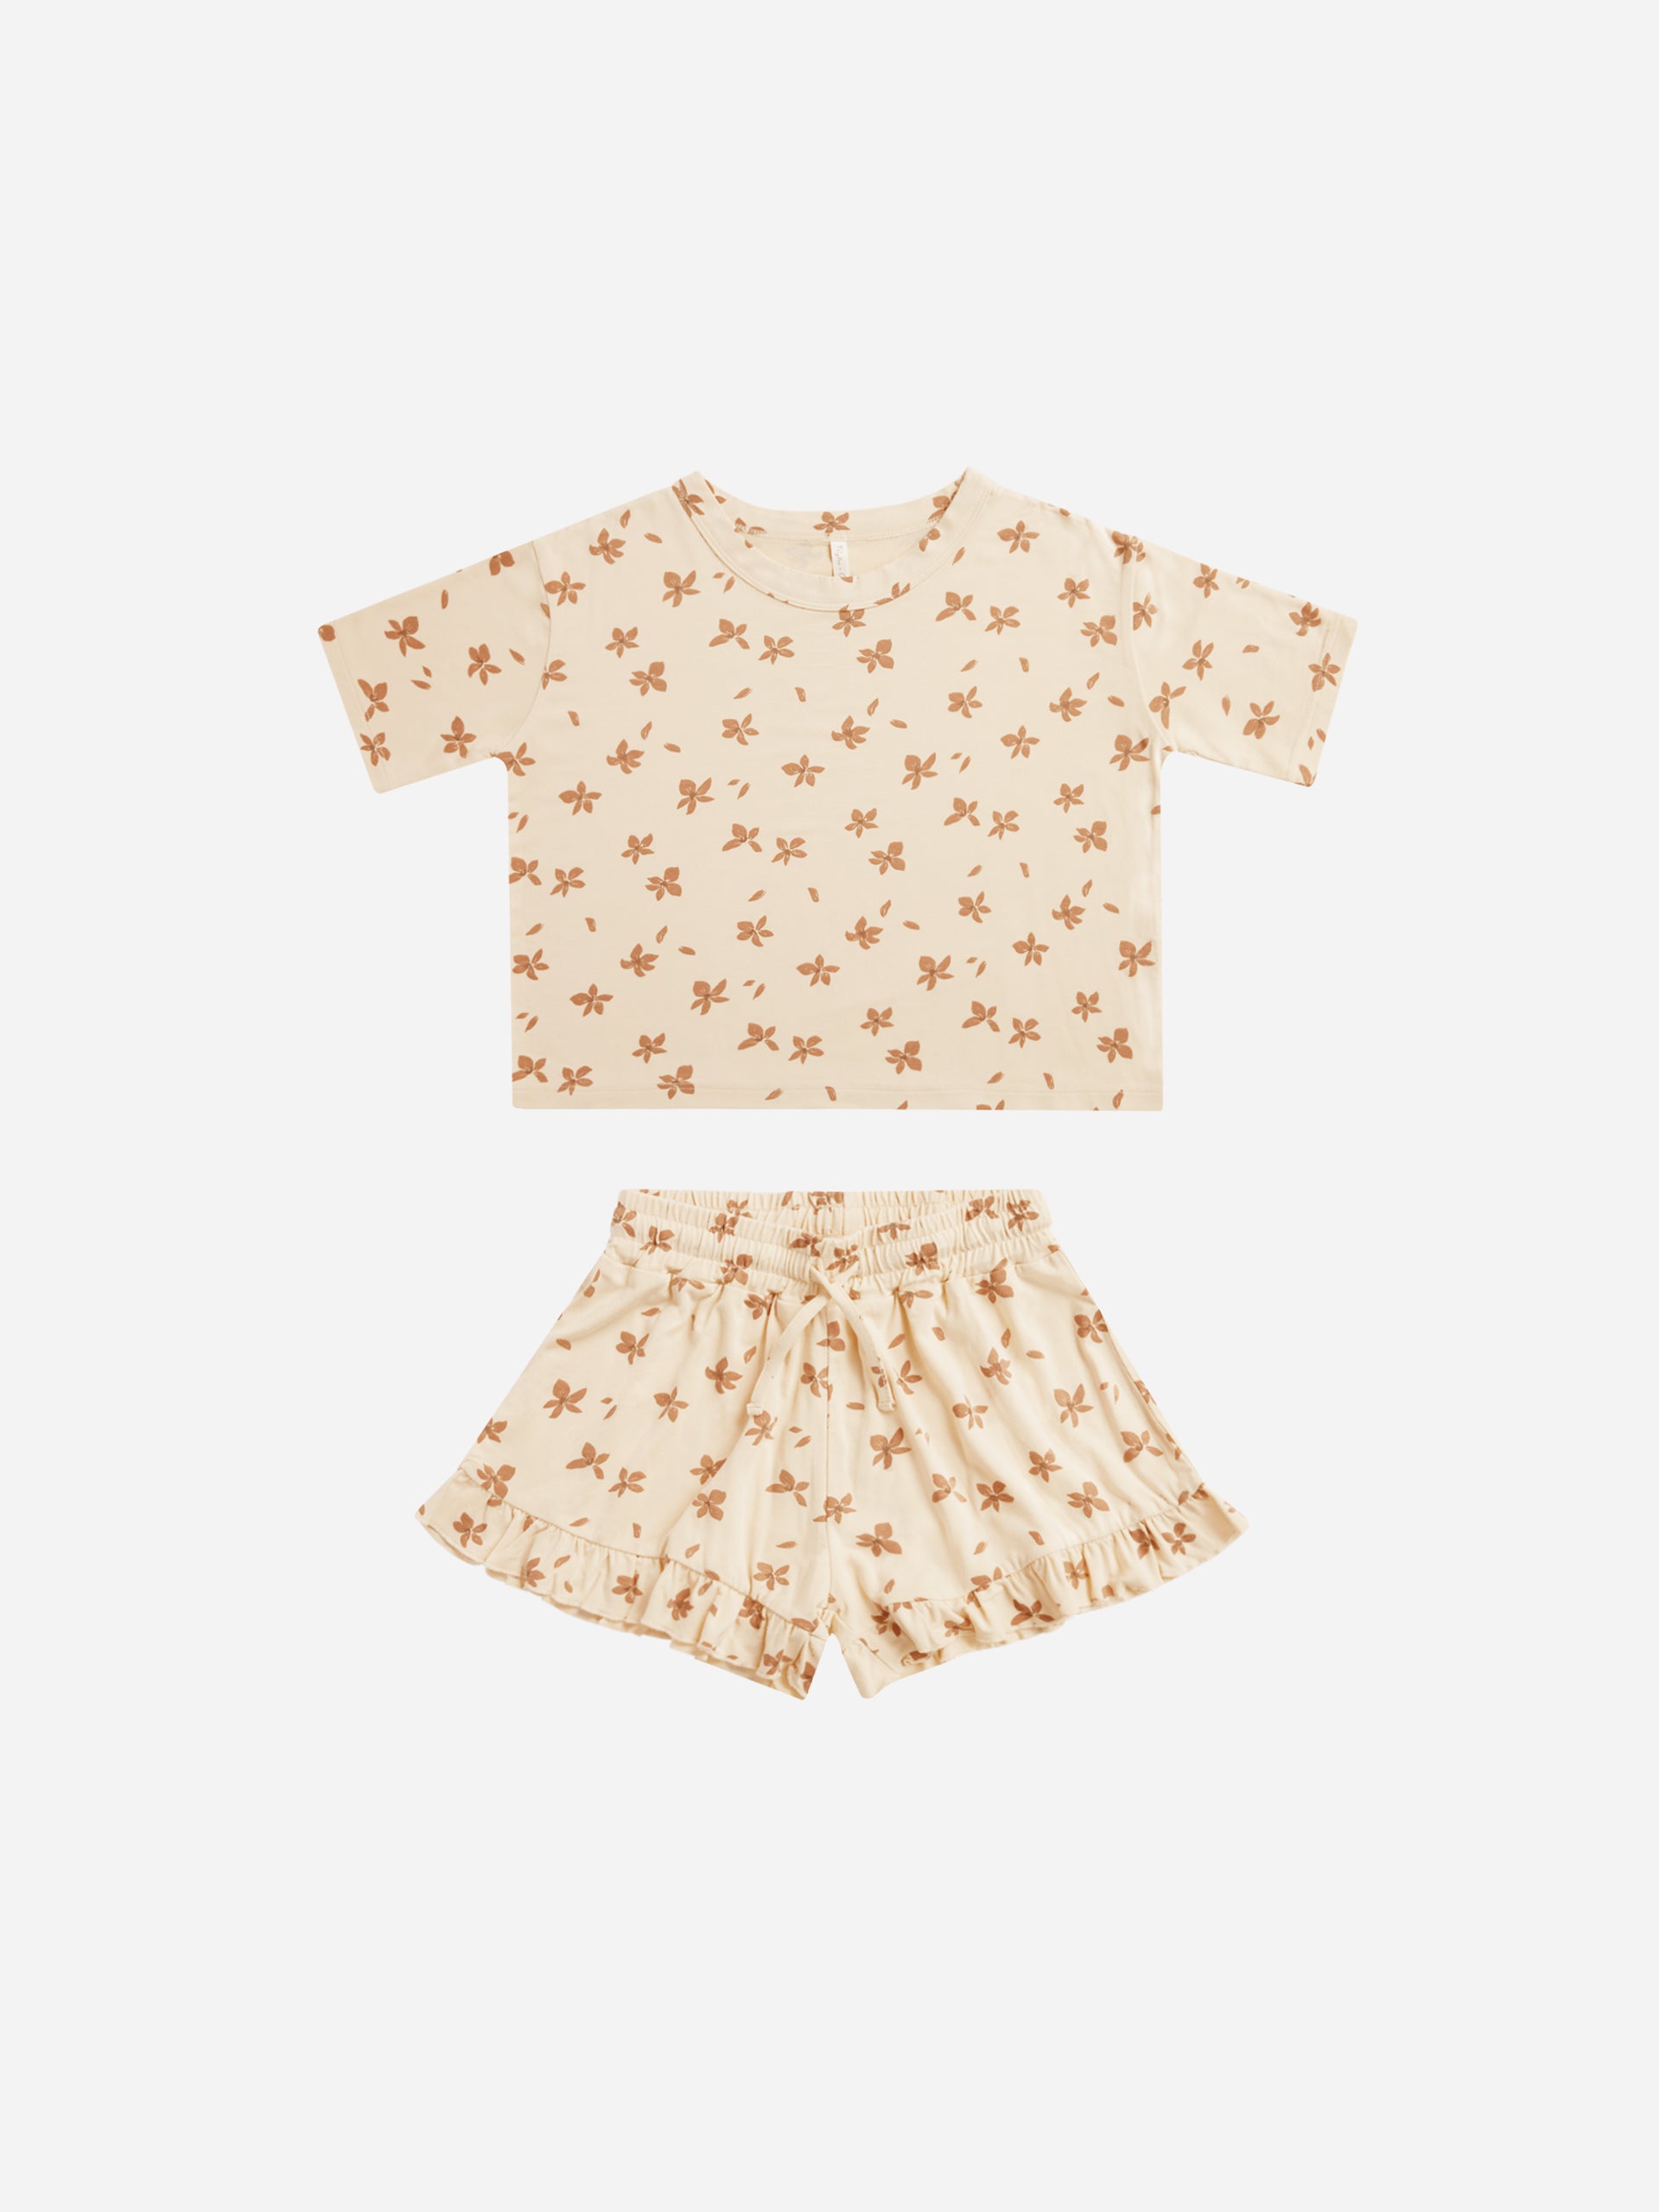 Mosie Set || Scatter - Rylee + Cru | Kids Clothes | Trendy Baby Clothes | Modern Infant Outfits |